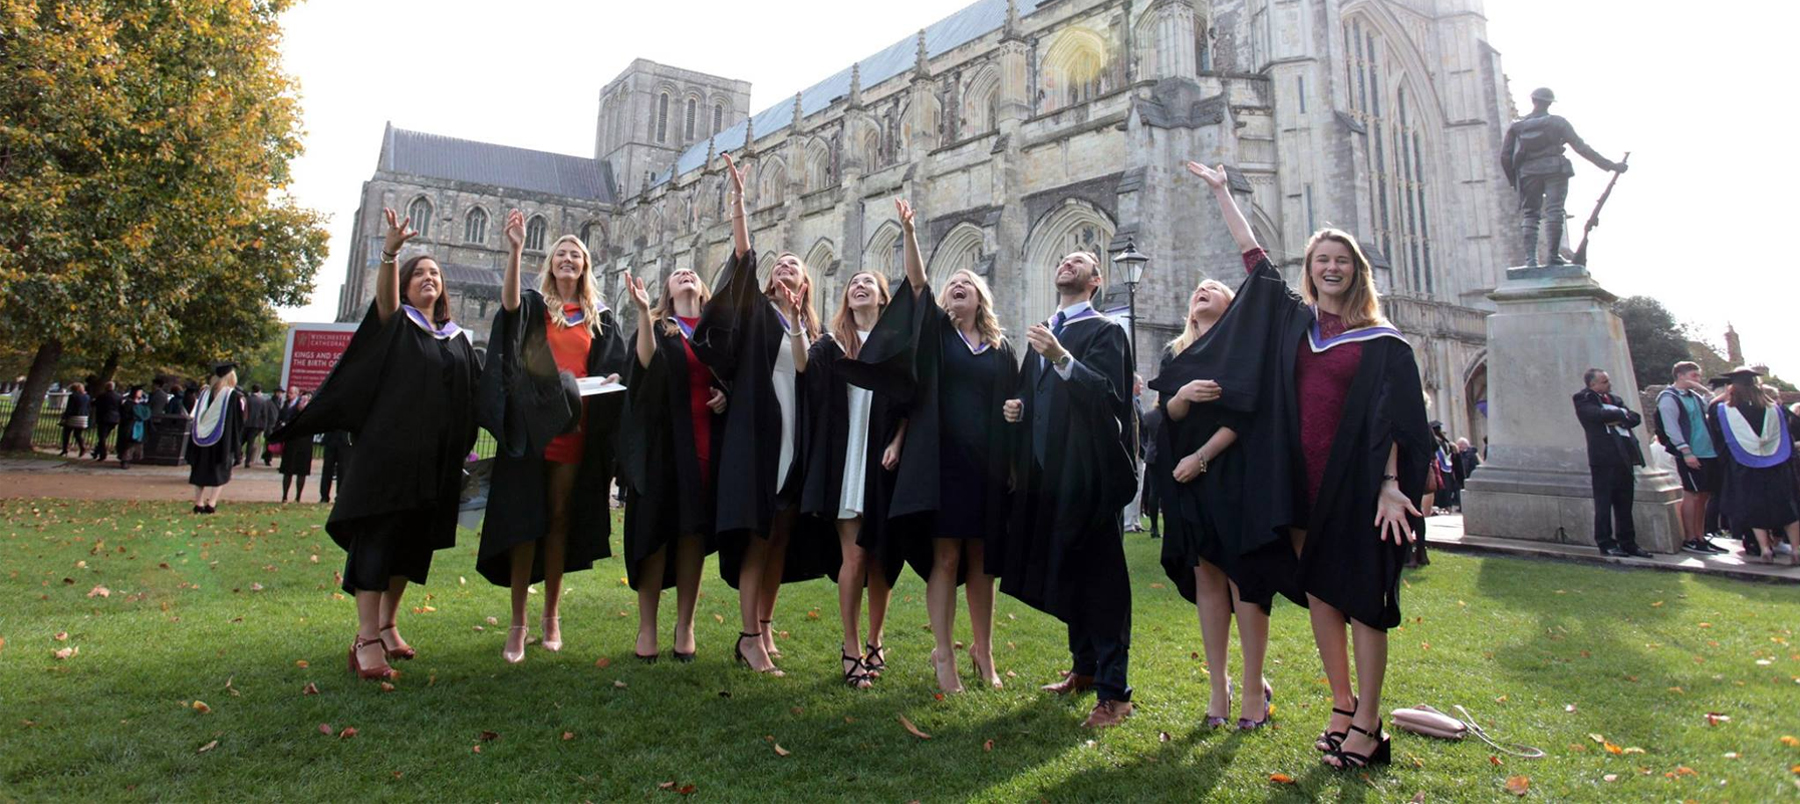 Graduation at the Winchester Cathedral